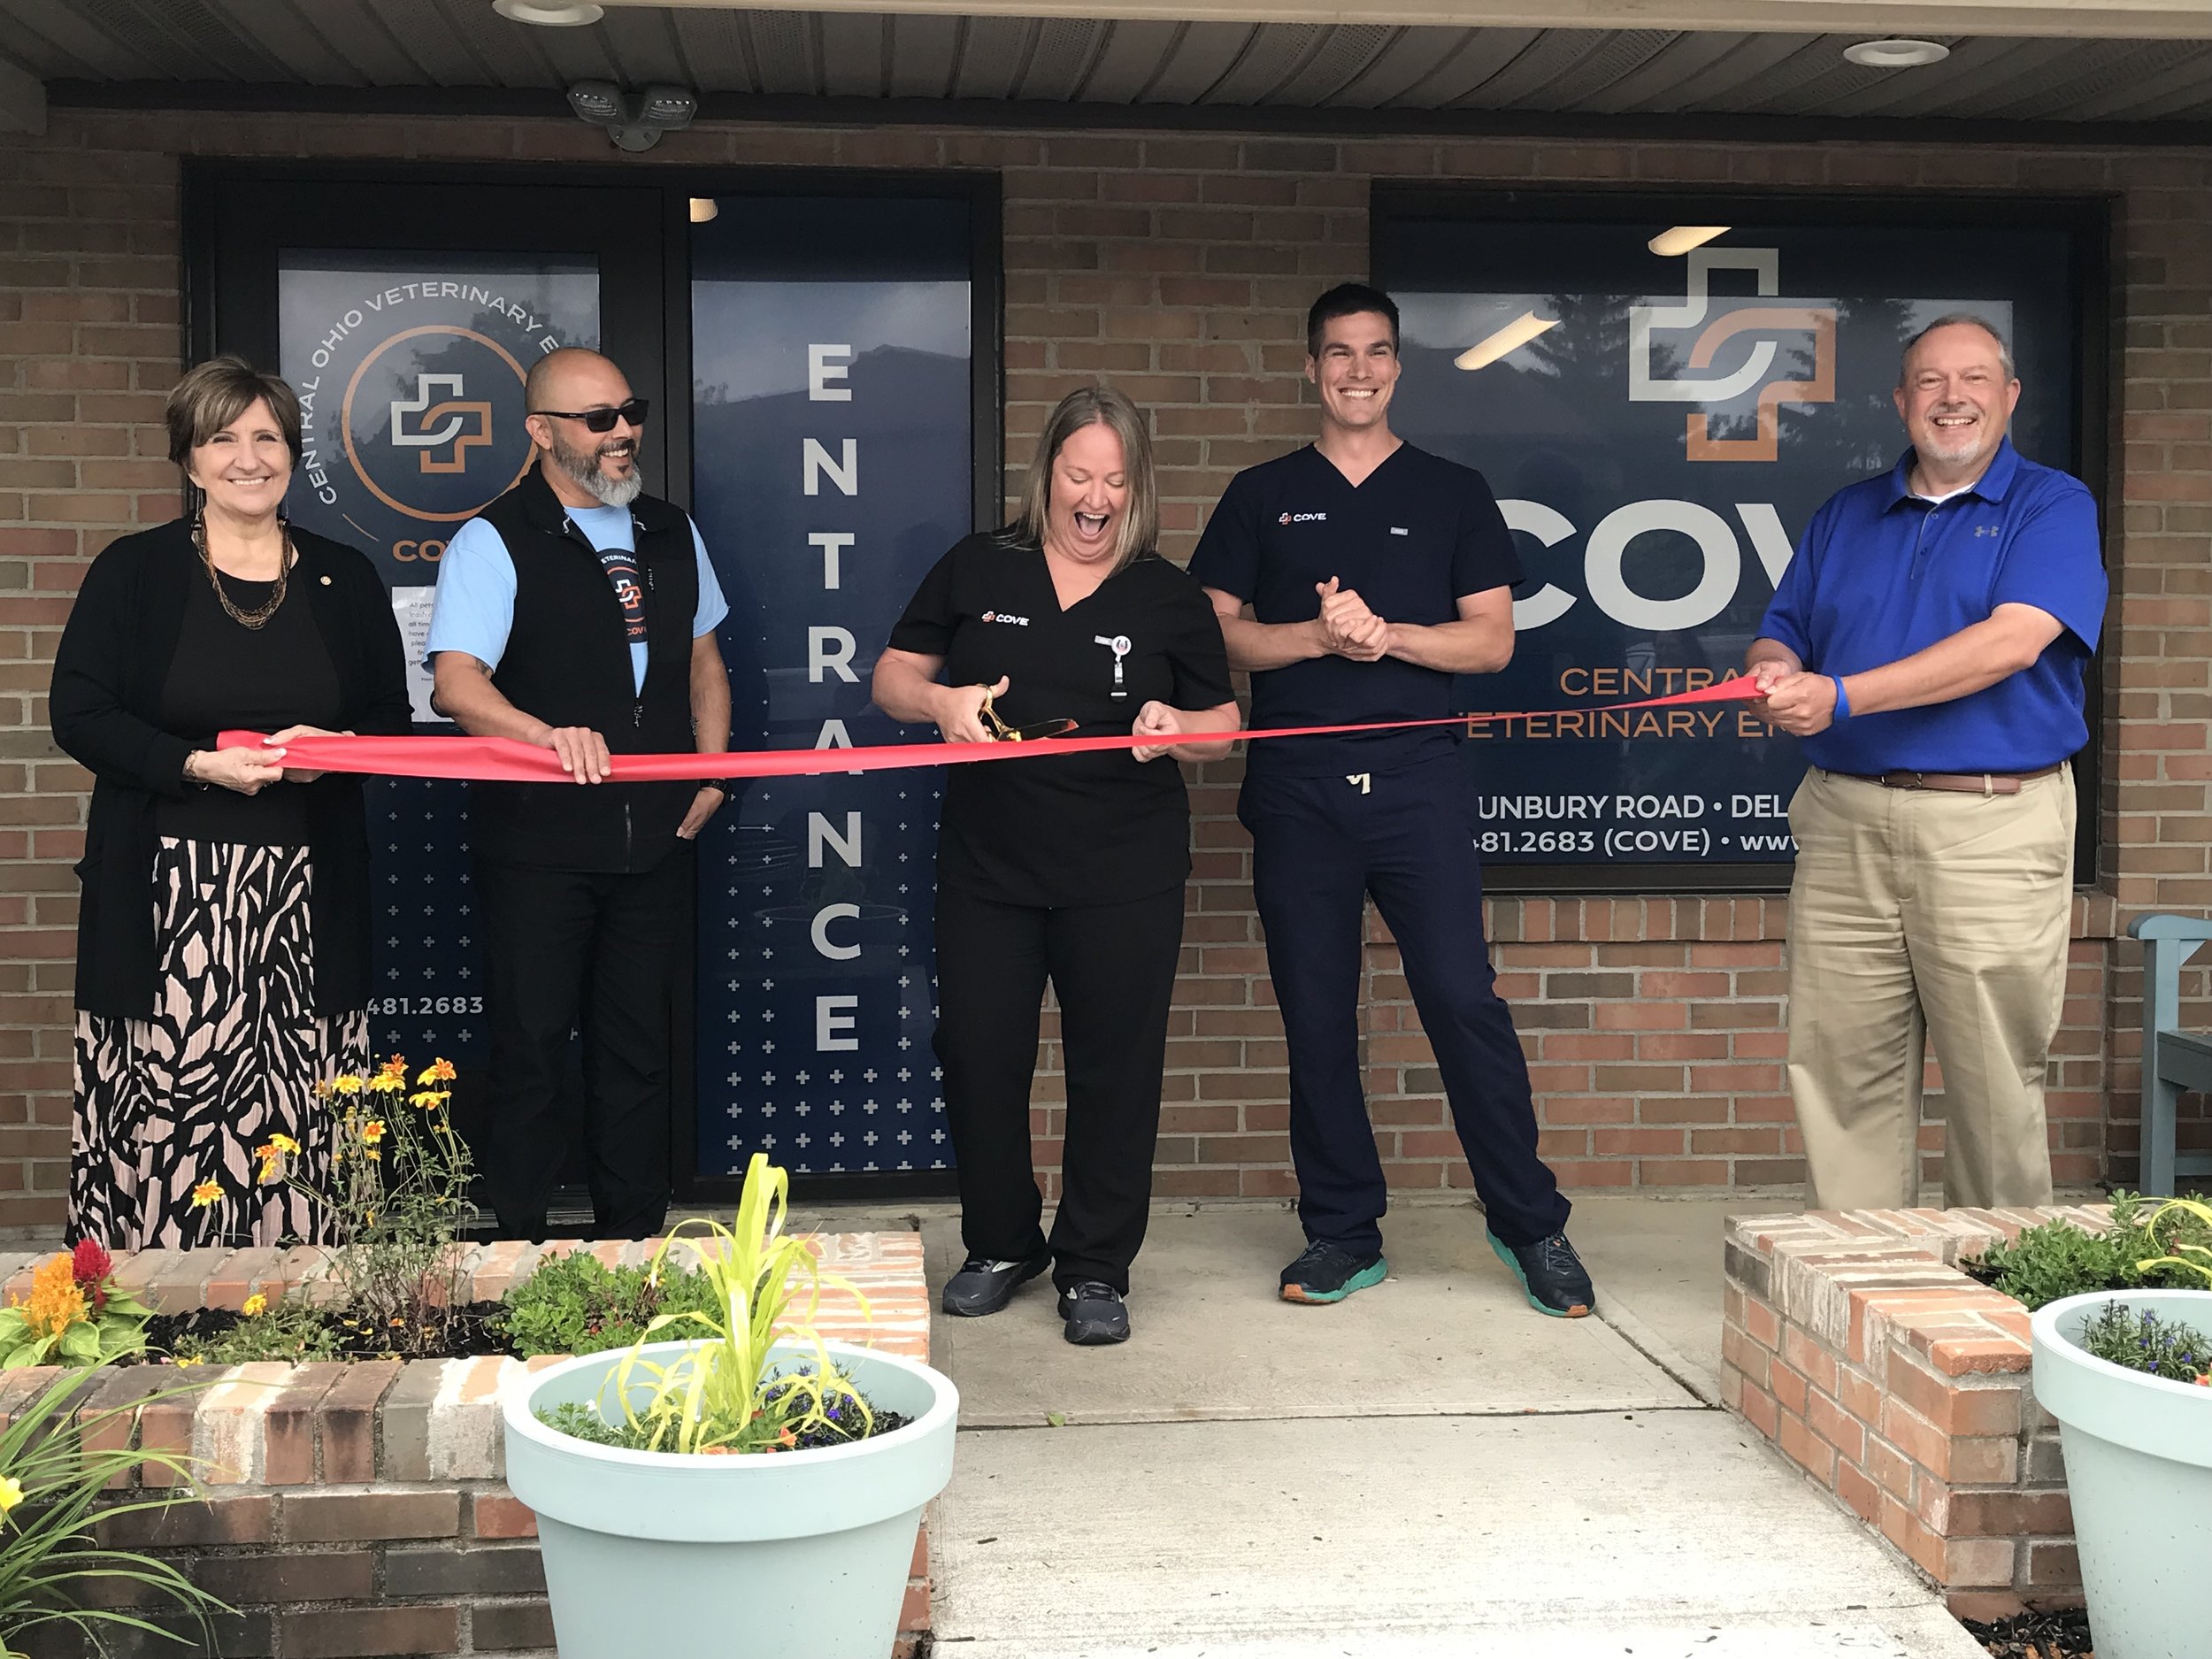 Central Ohio Veterinary Emergency(COVE) Ribbon Cutting 6-12-23